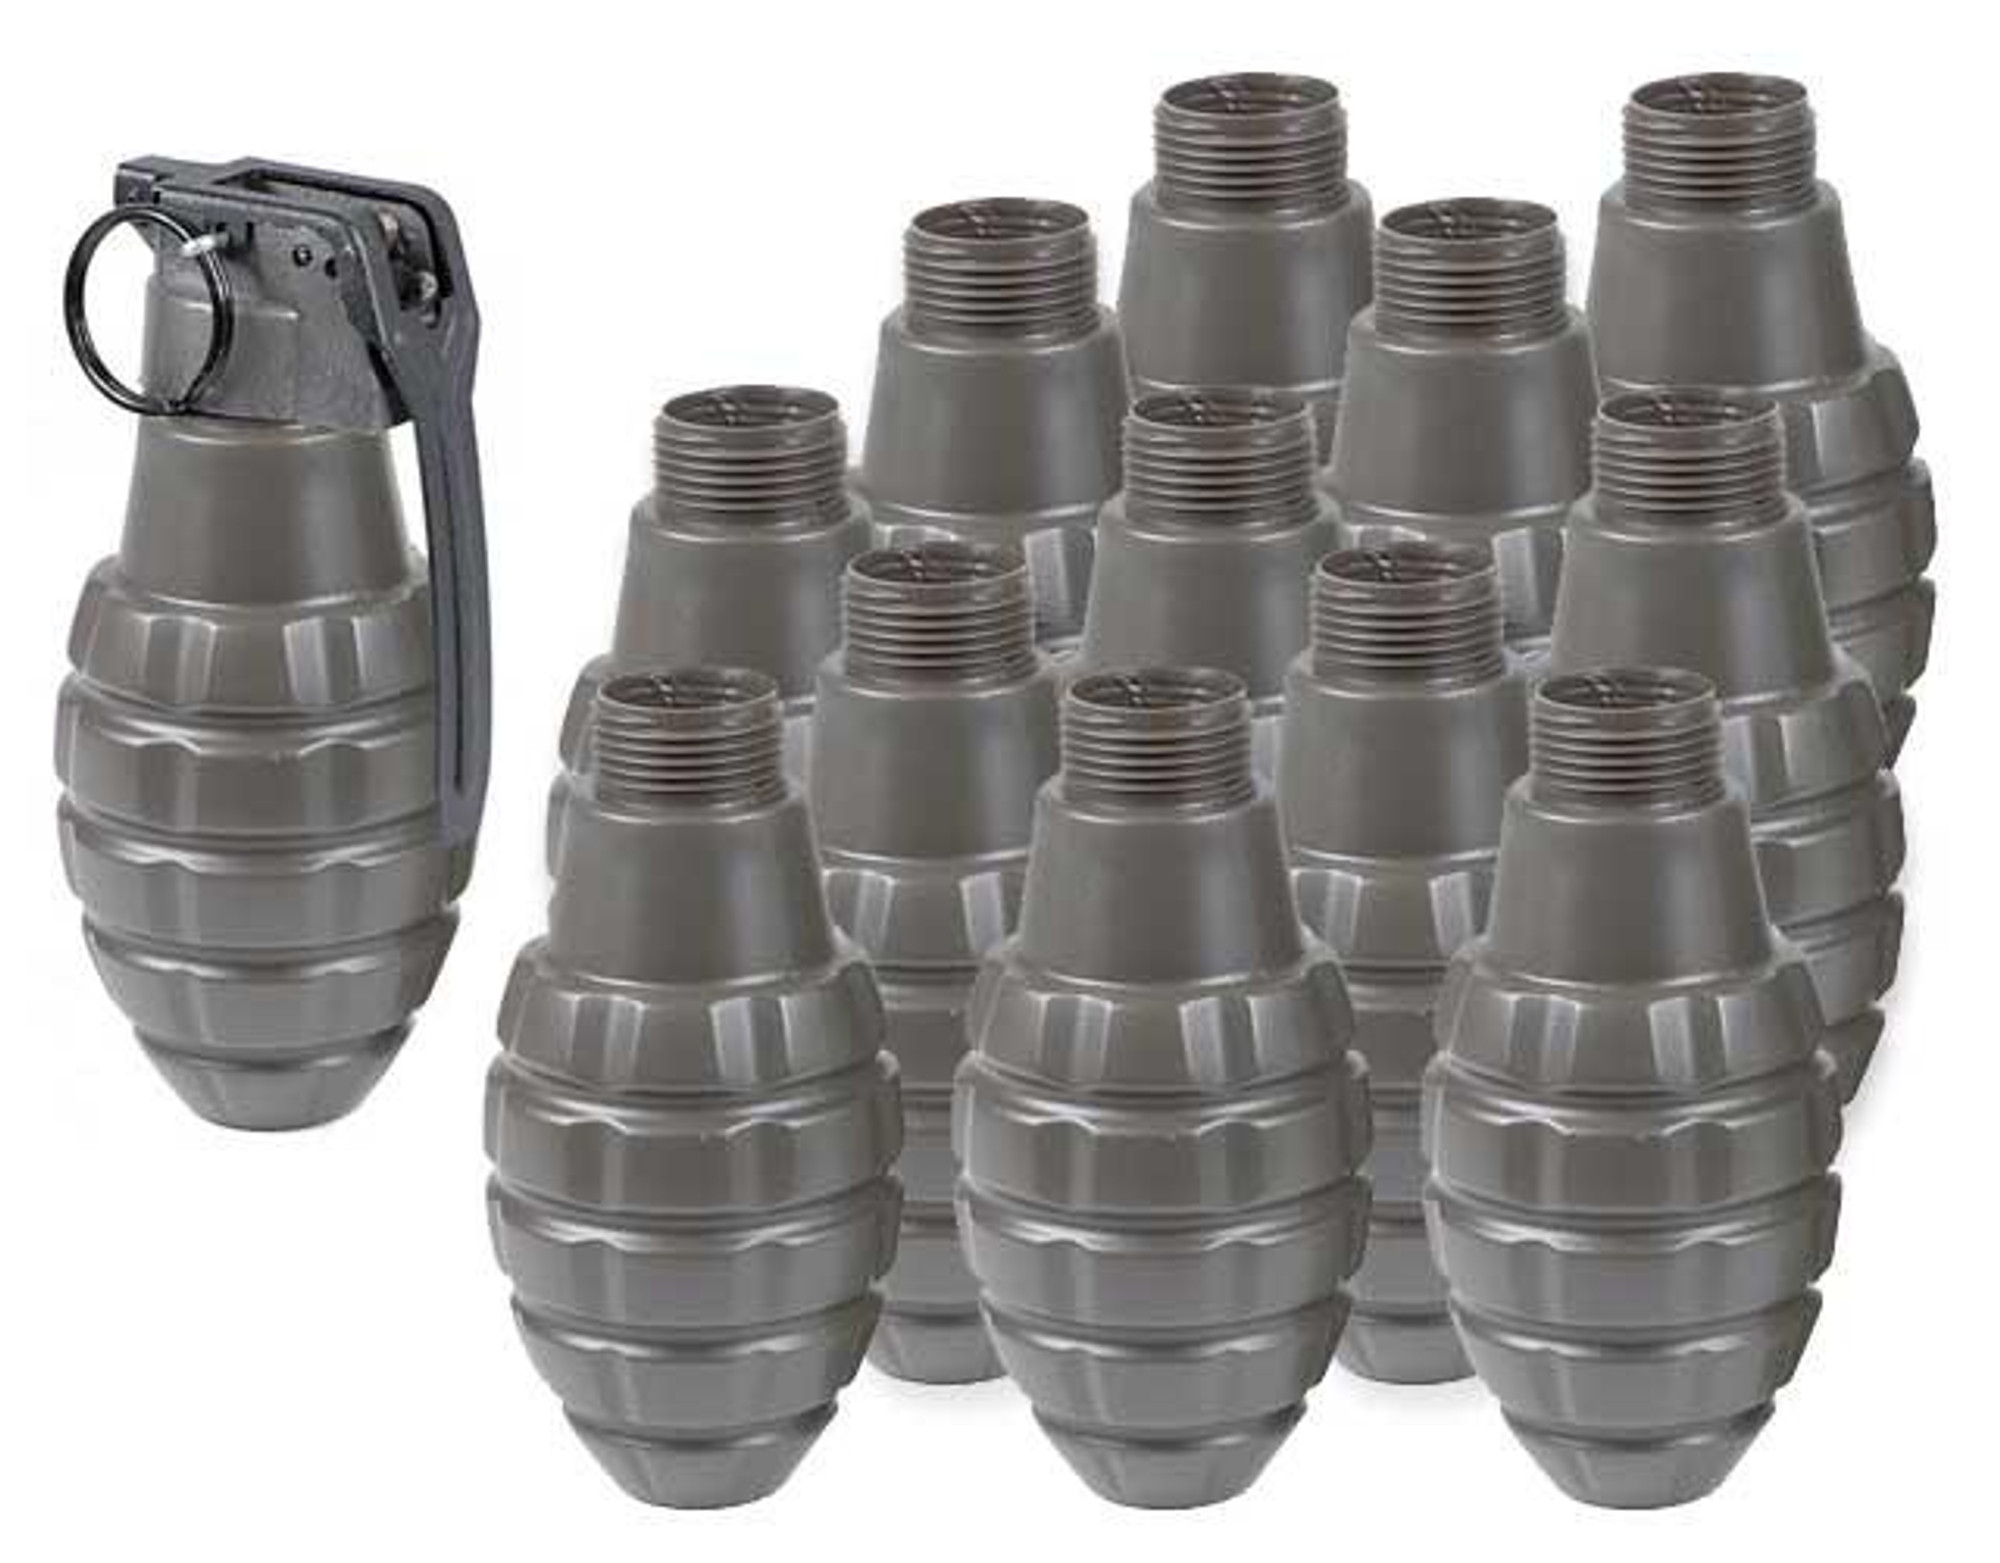 Thunder B Airsoft Co2 Simulation Grenade (Package: 12 Shell Set / Pineapple Shell)